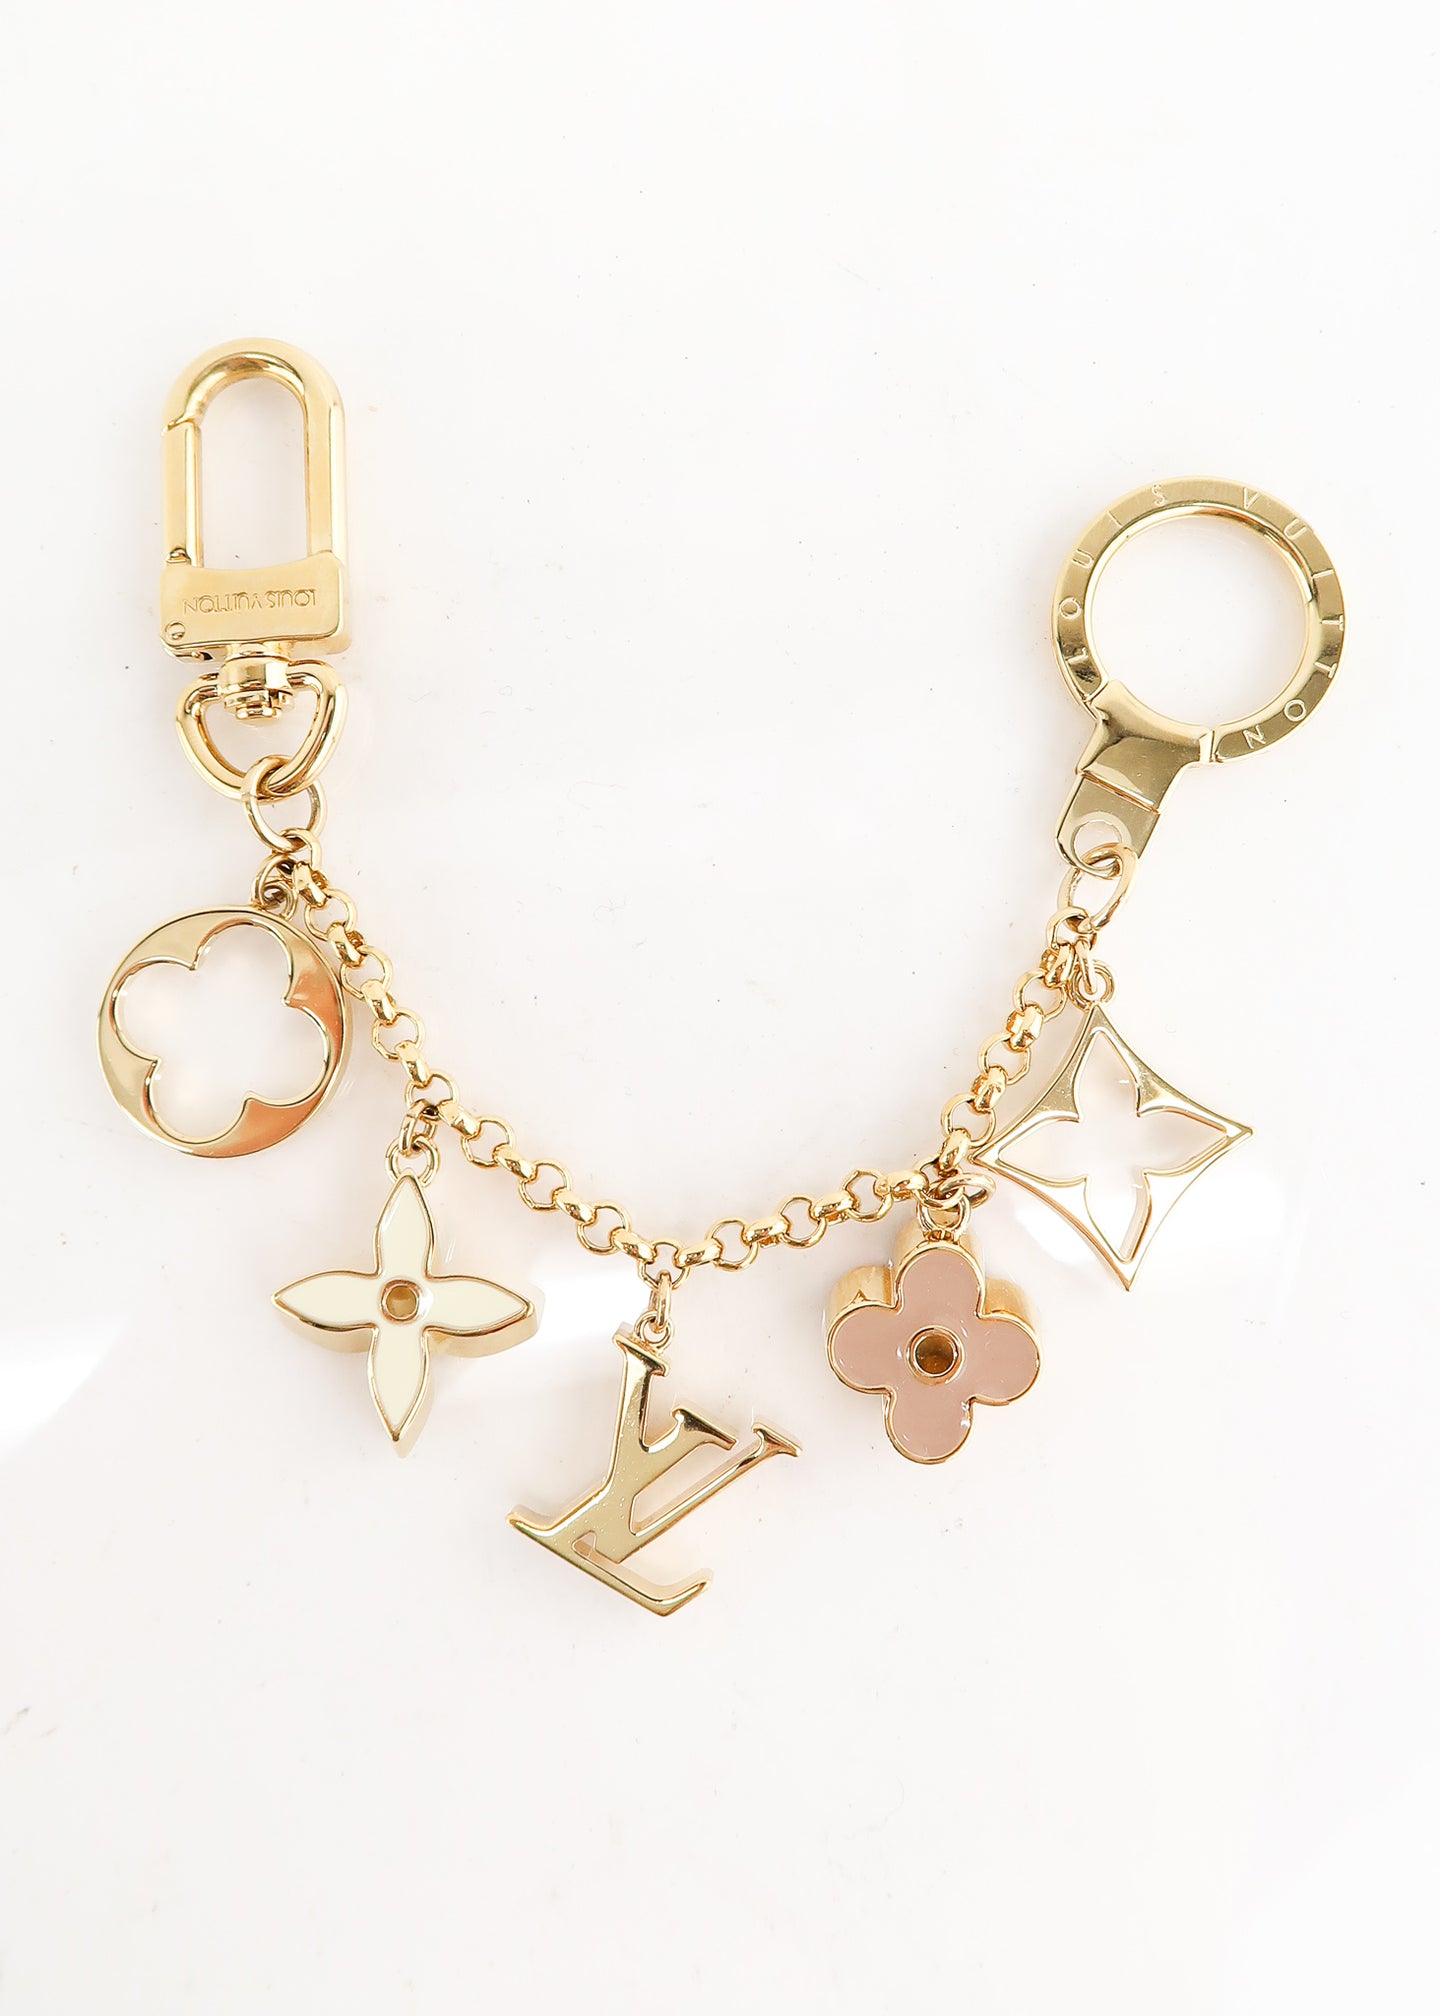 purse jewelry charms louis vuitton